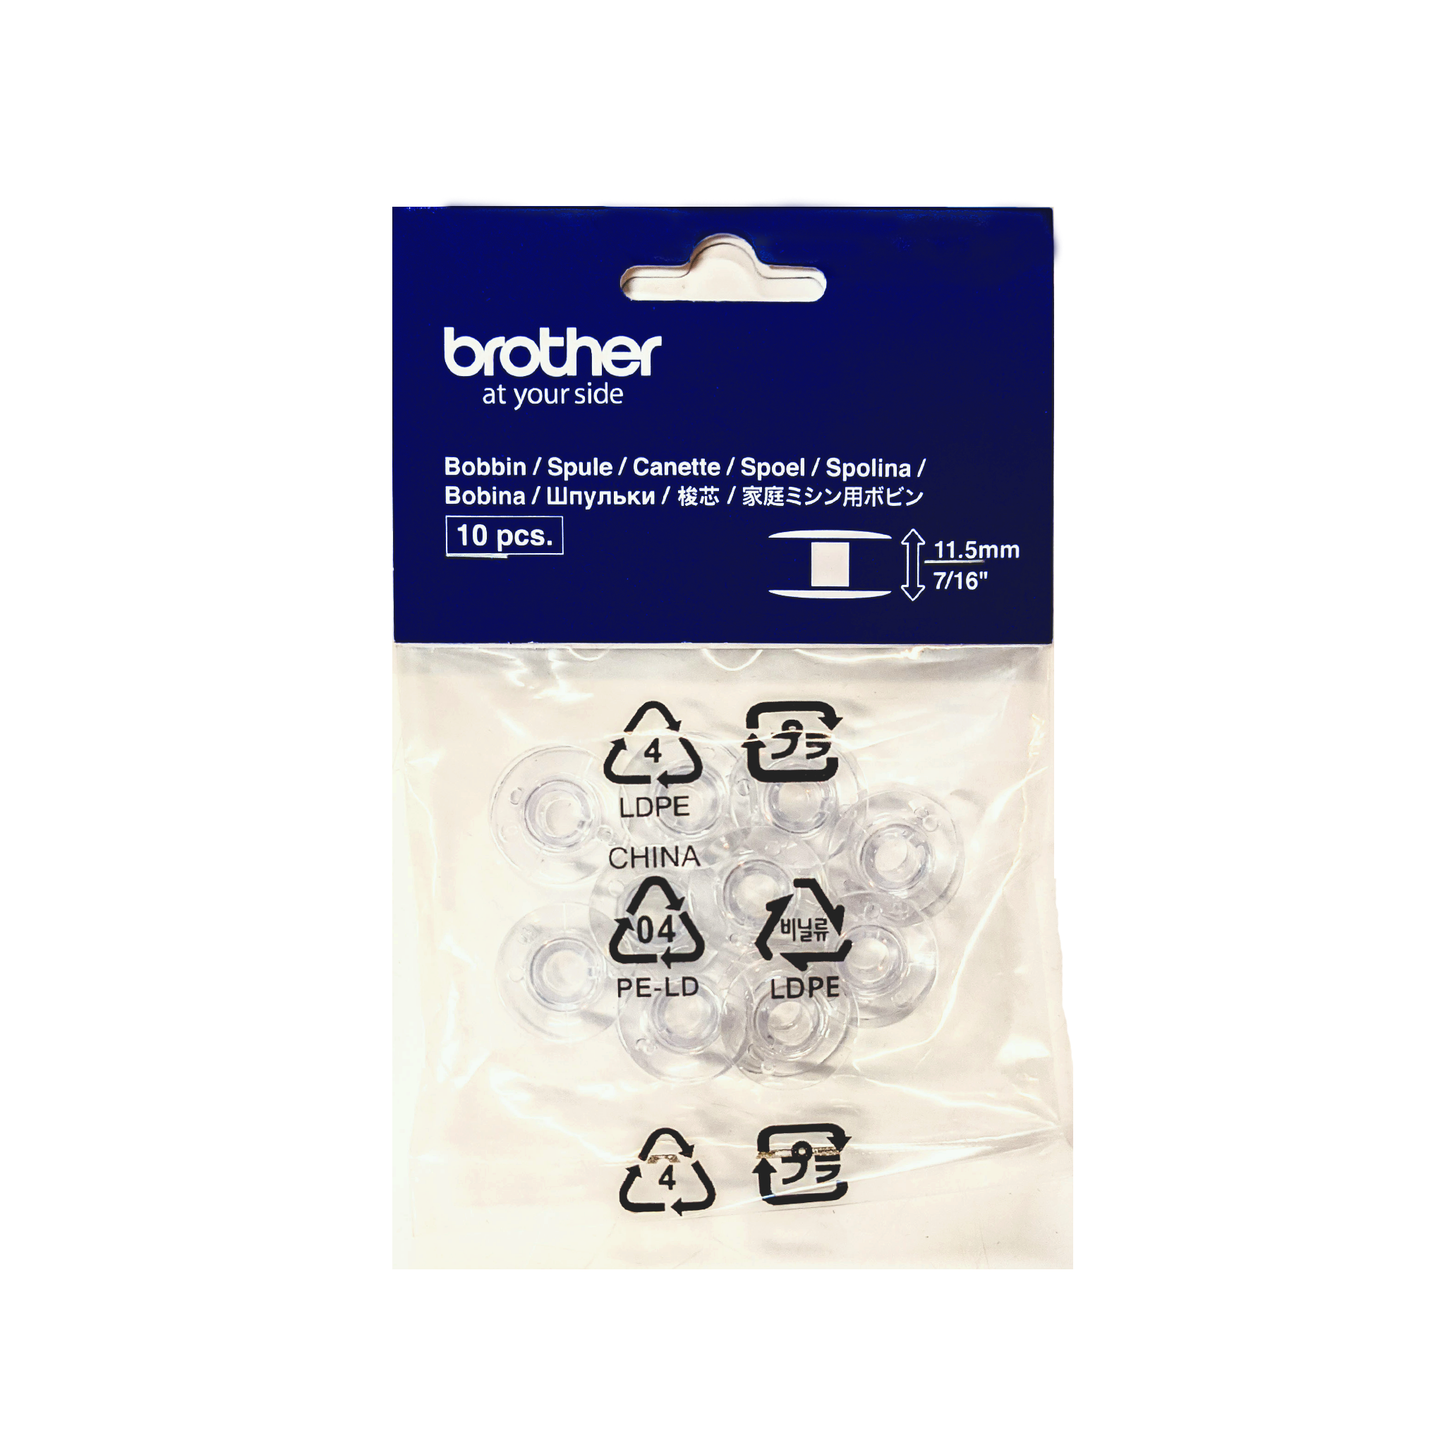 Brother Bobbins for Sewing Machines